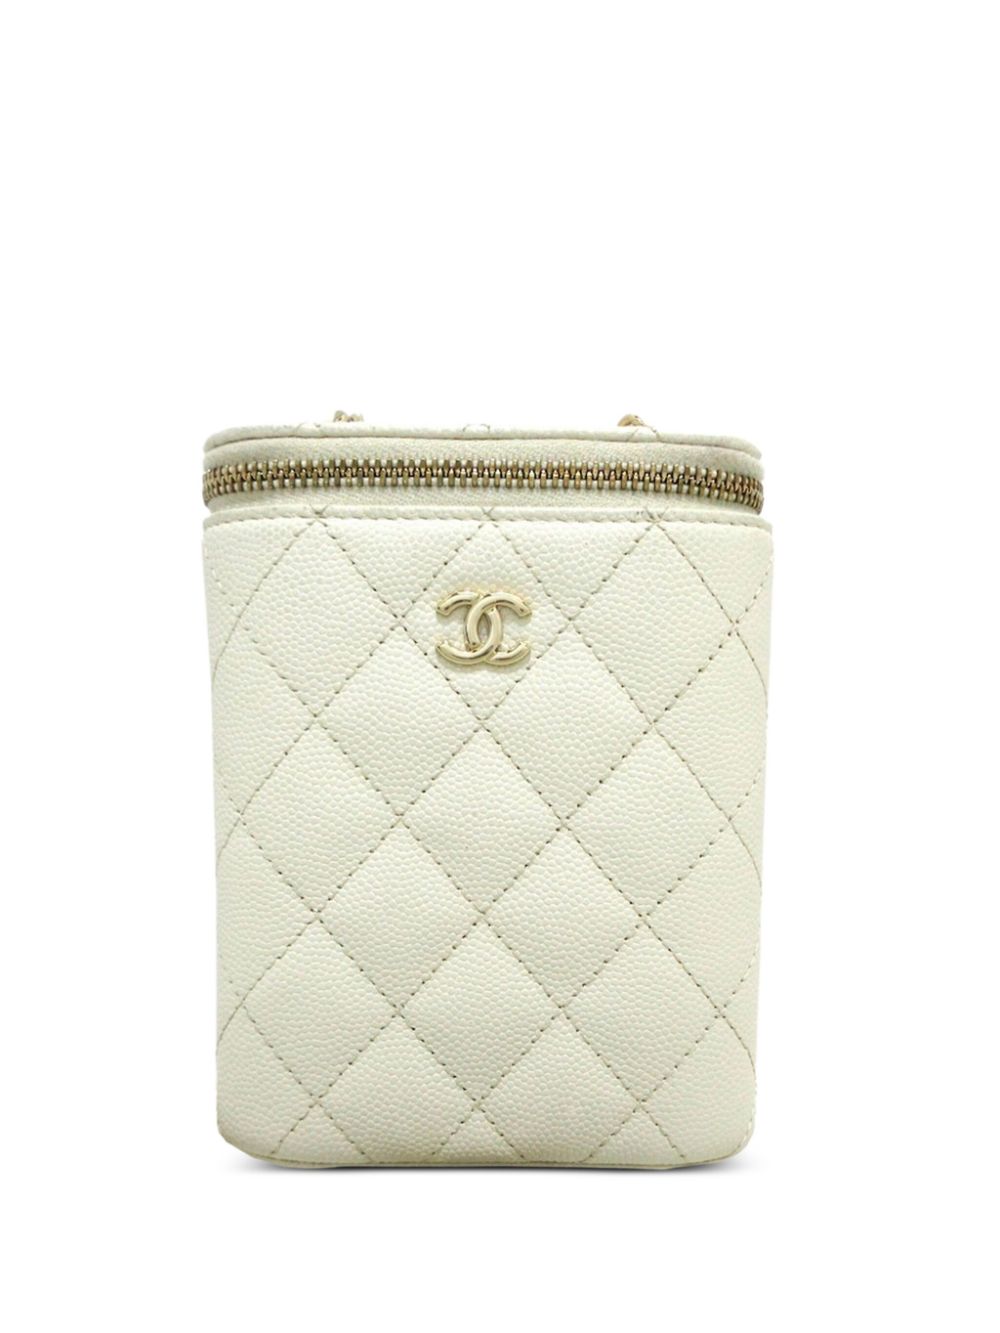 Pre-owned Chanel 2021 Small Vertical Vanity Clutch In White